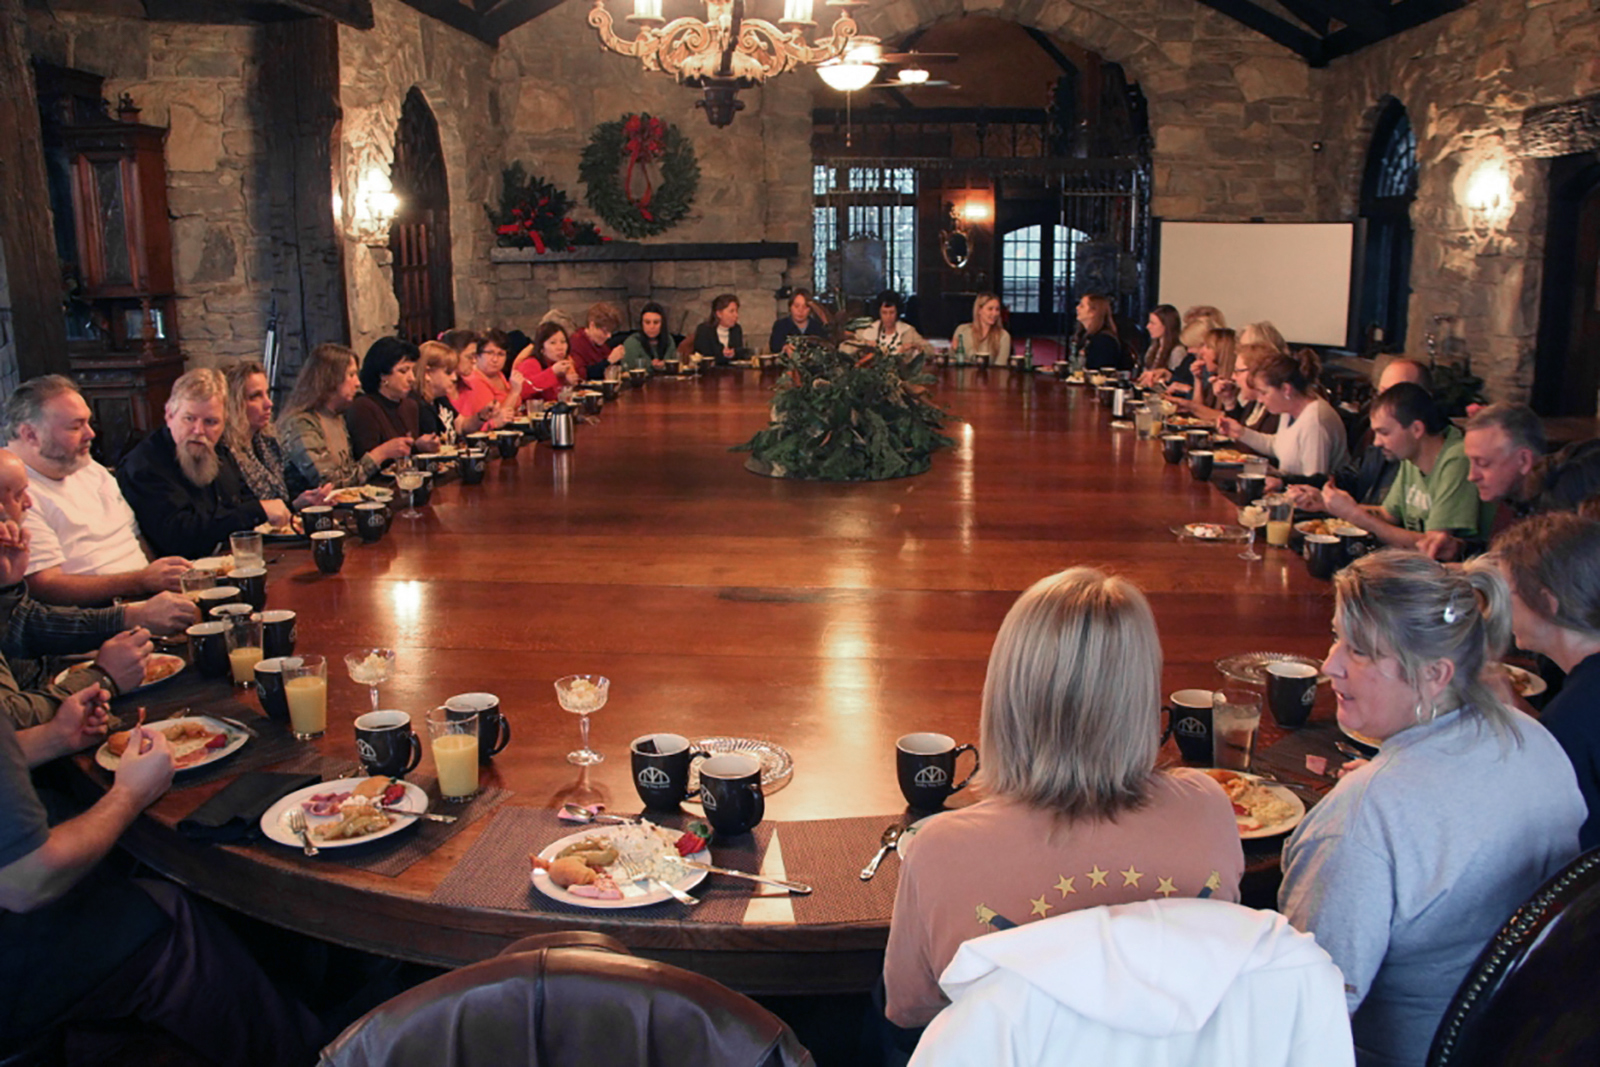 Colonel Littleton staff seated at the large dining room table eating breakfast at the Milky Way Farm.